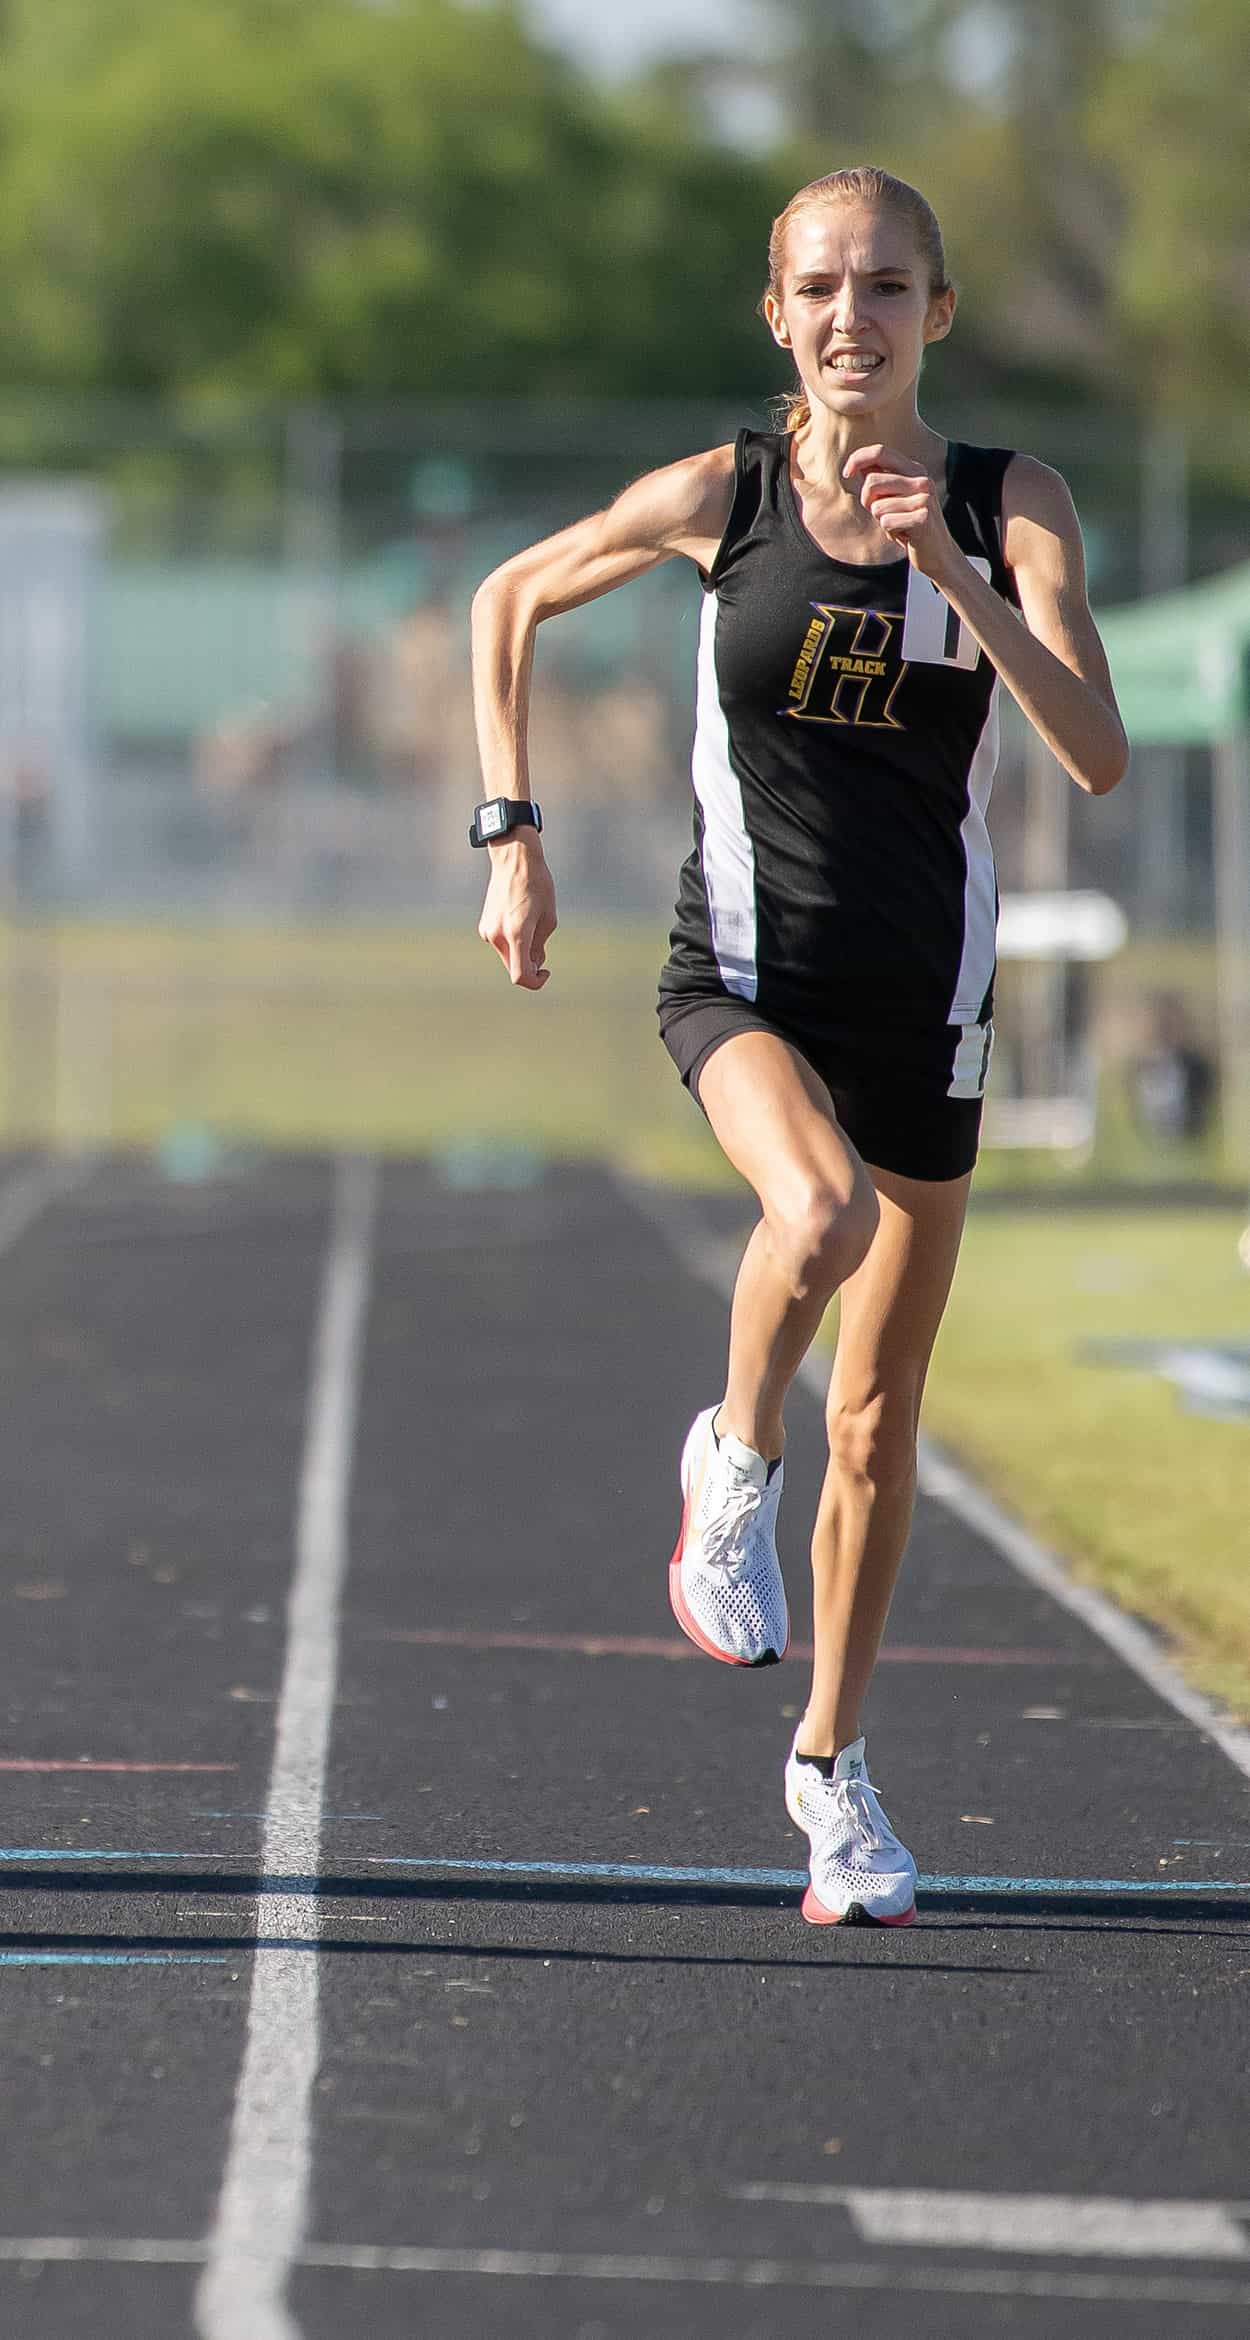 Womens 1600 meter champ, Hernando High’s Remi Lay won by over 33 seconds in a time of 5:36.45 at the GC8 Track and Field Championships at Weeki Wachee High School. Photo by [Joe DiCristofalo]